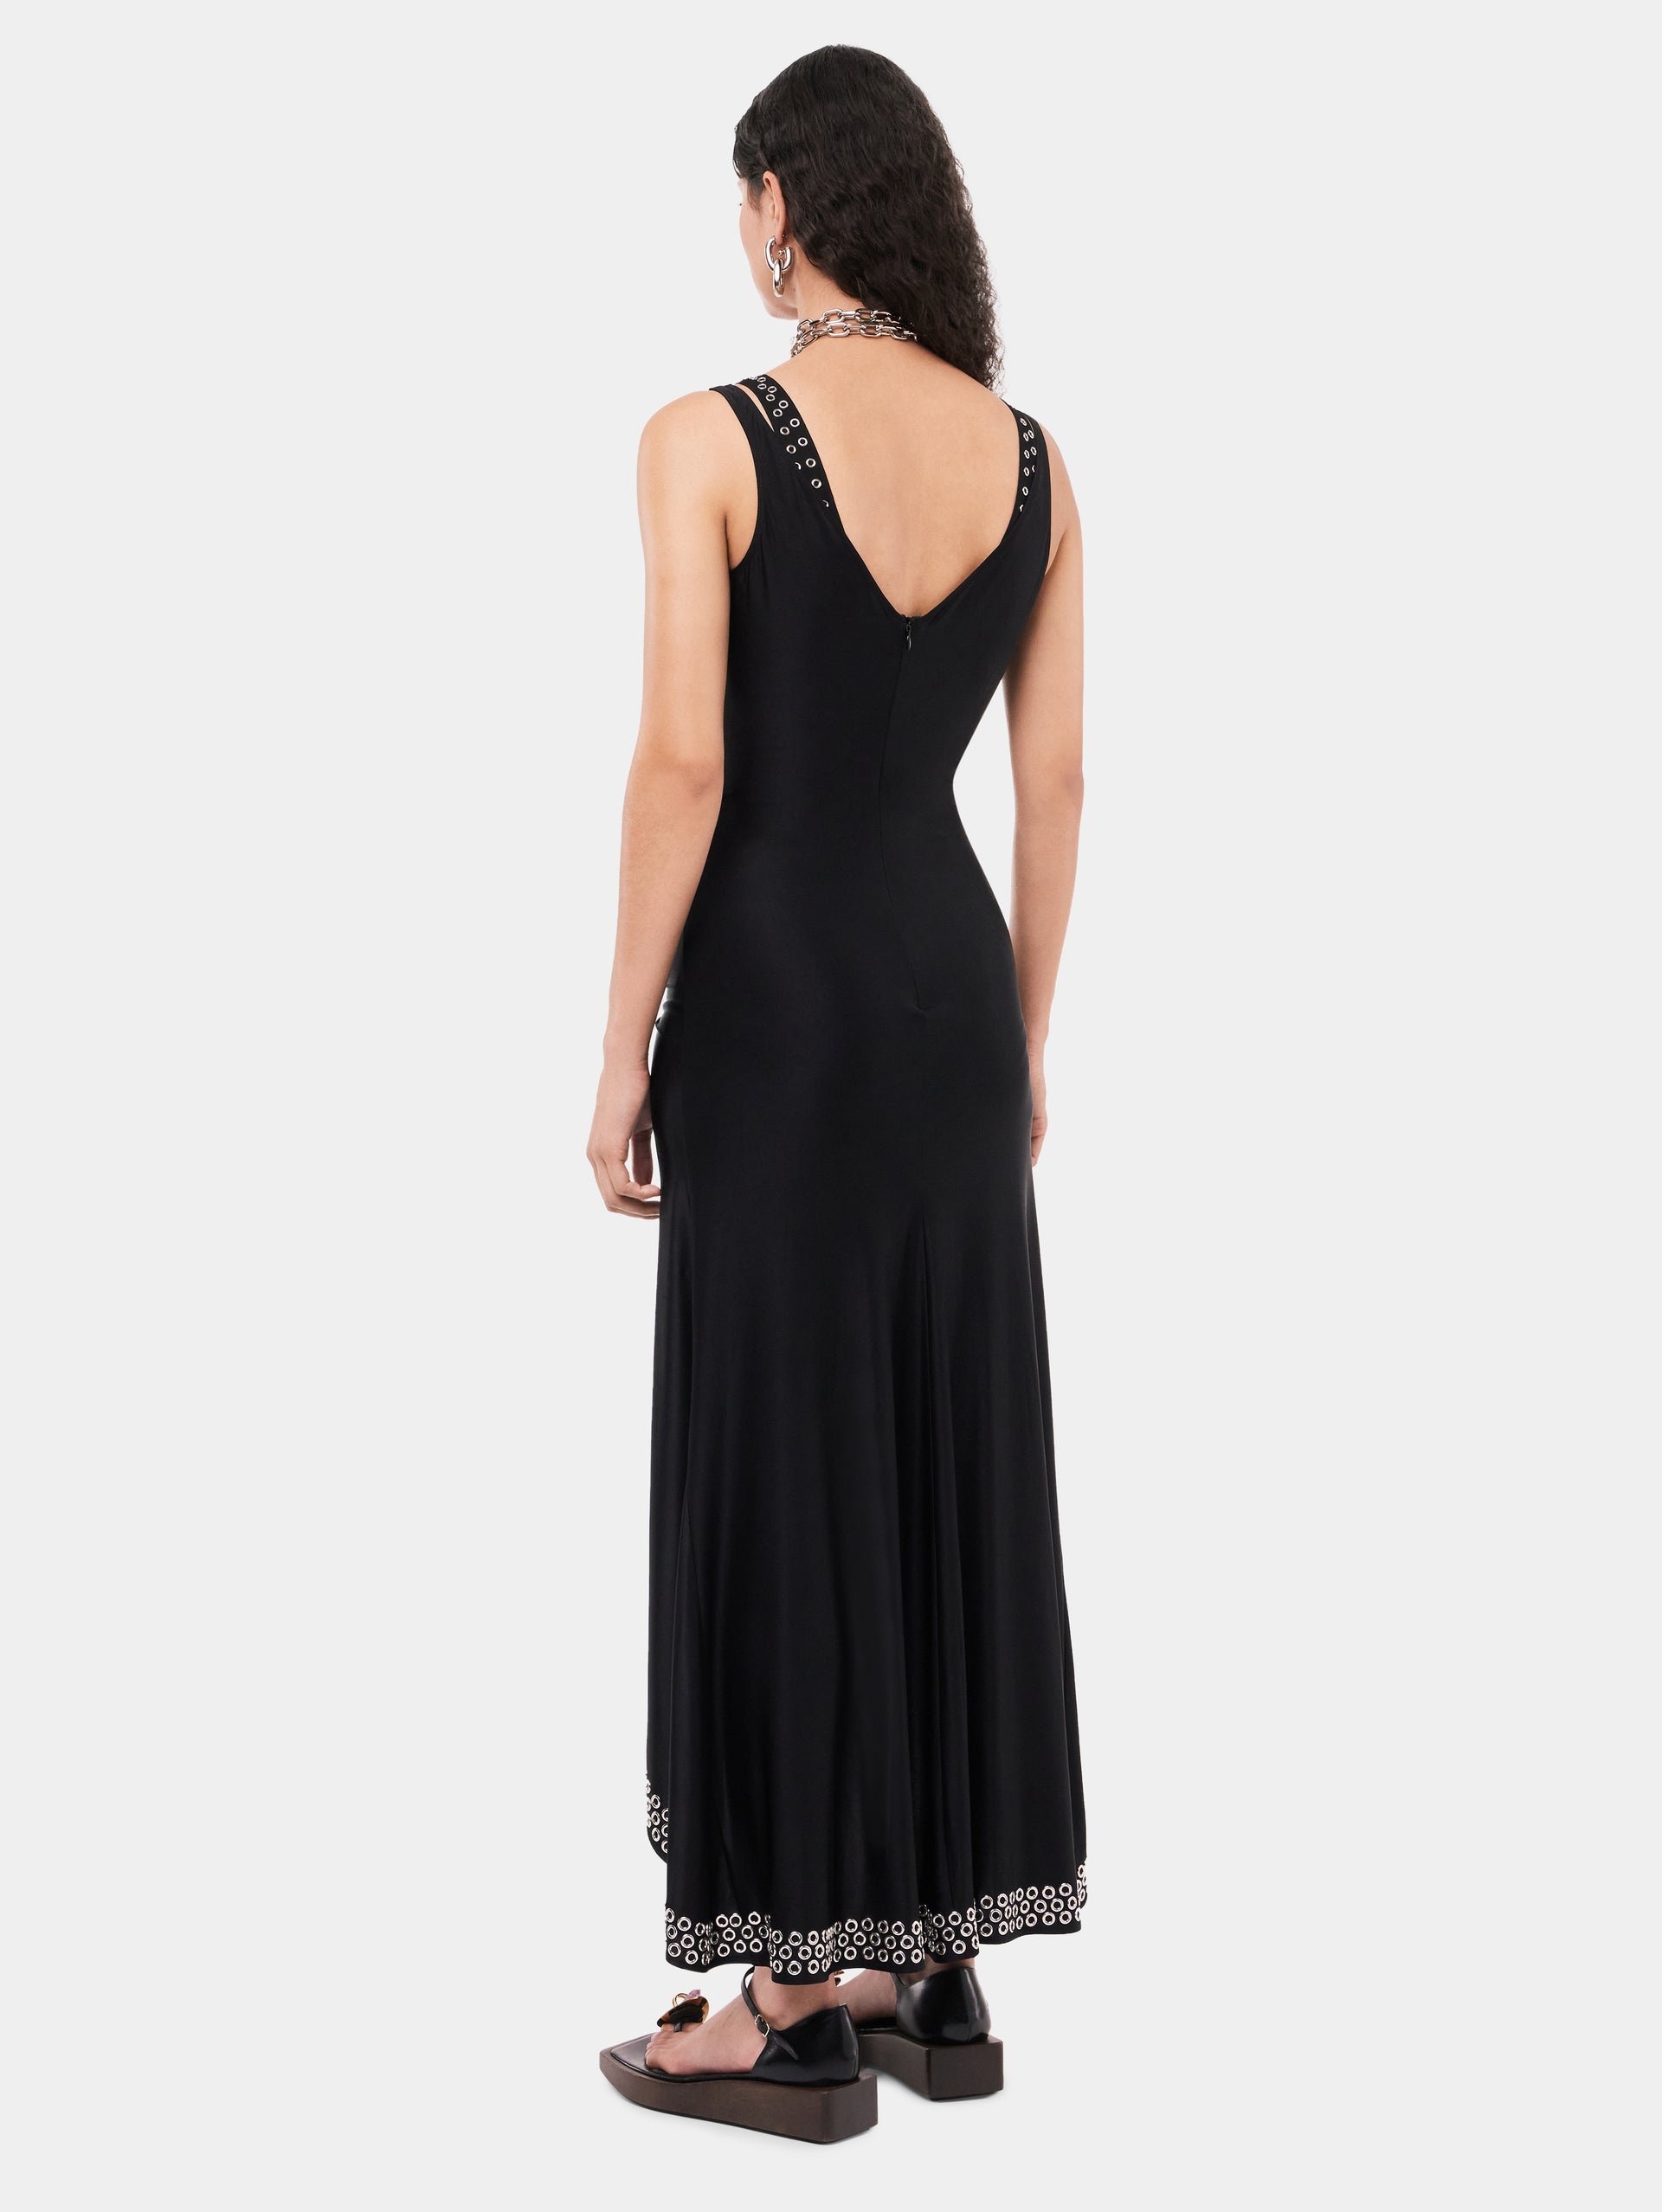 LONG BLACK DRESS WITH EMBROIDERED METALLIC EYELETS - 5